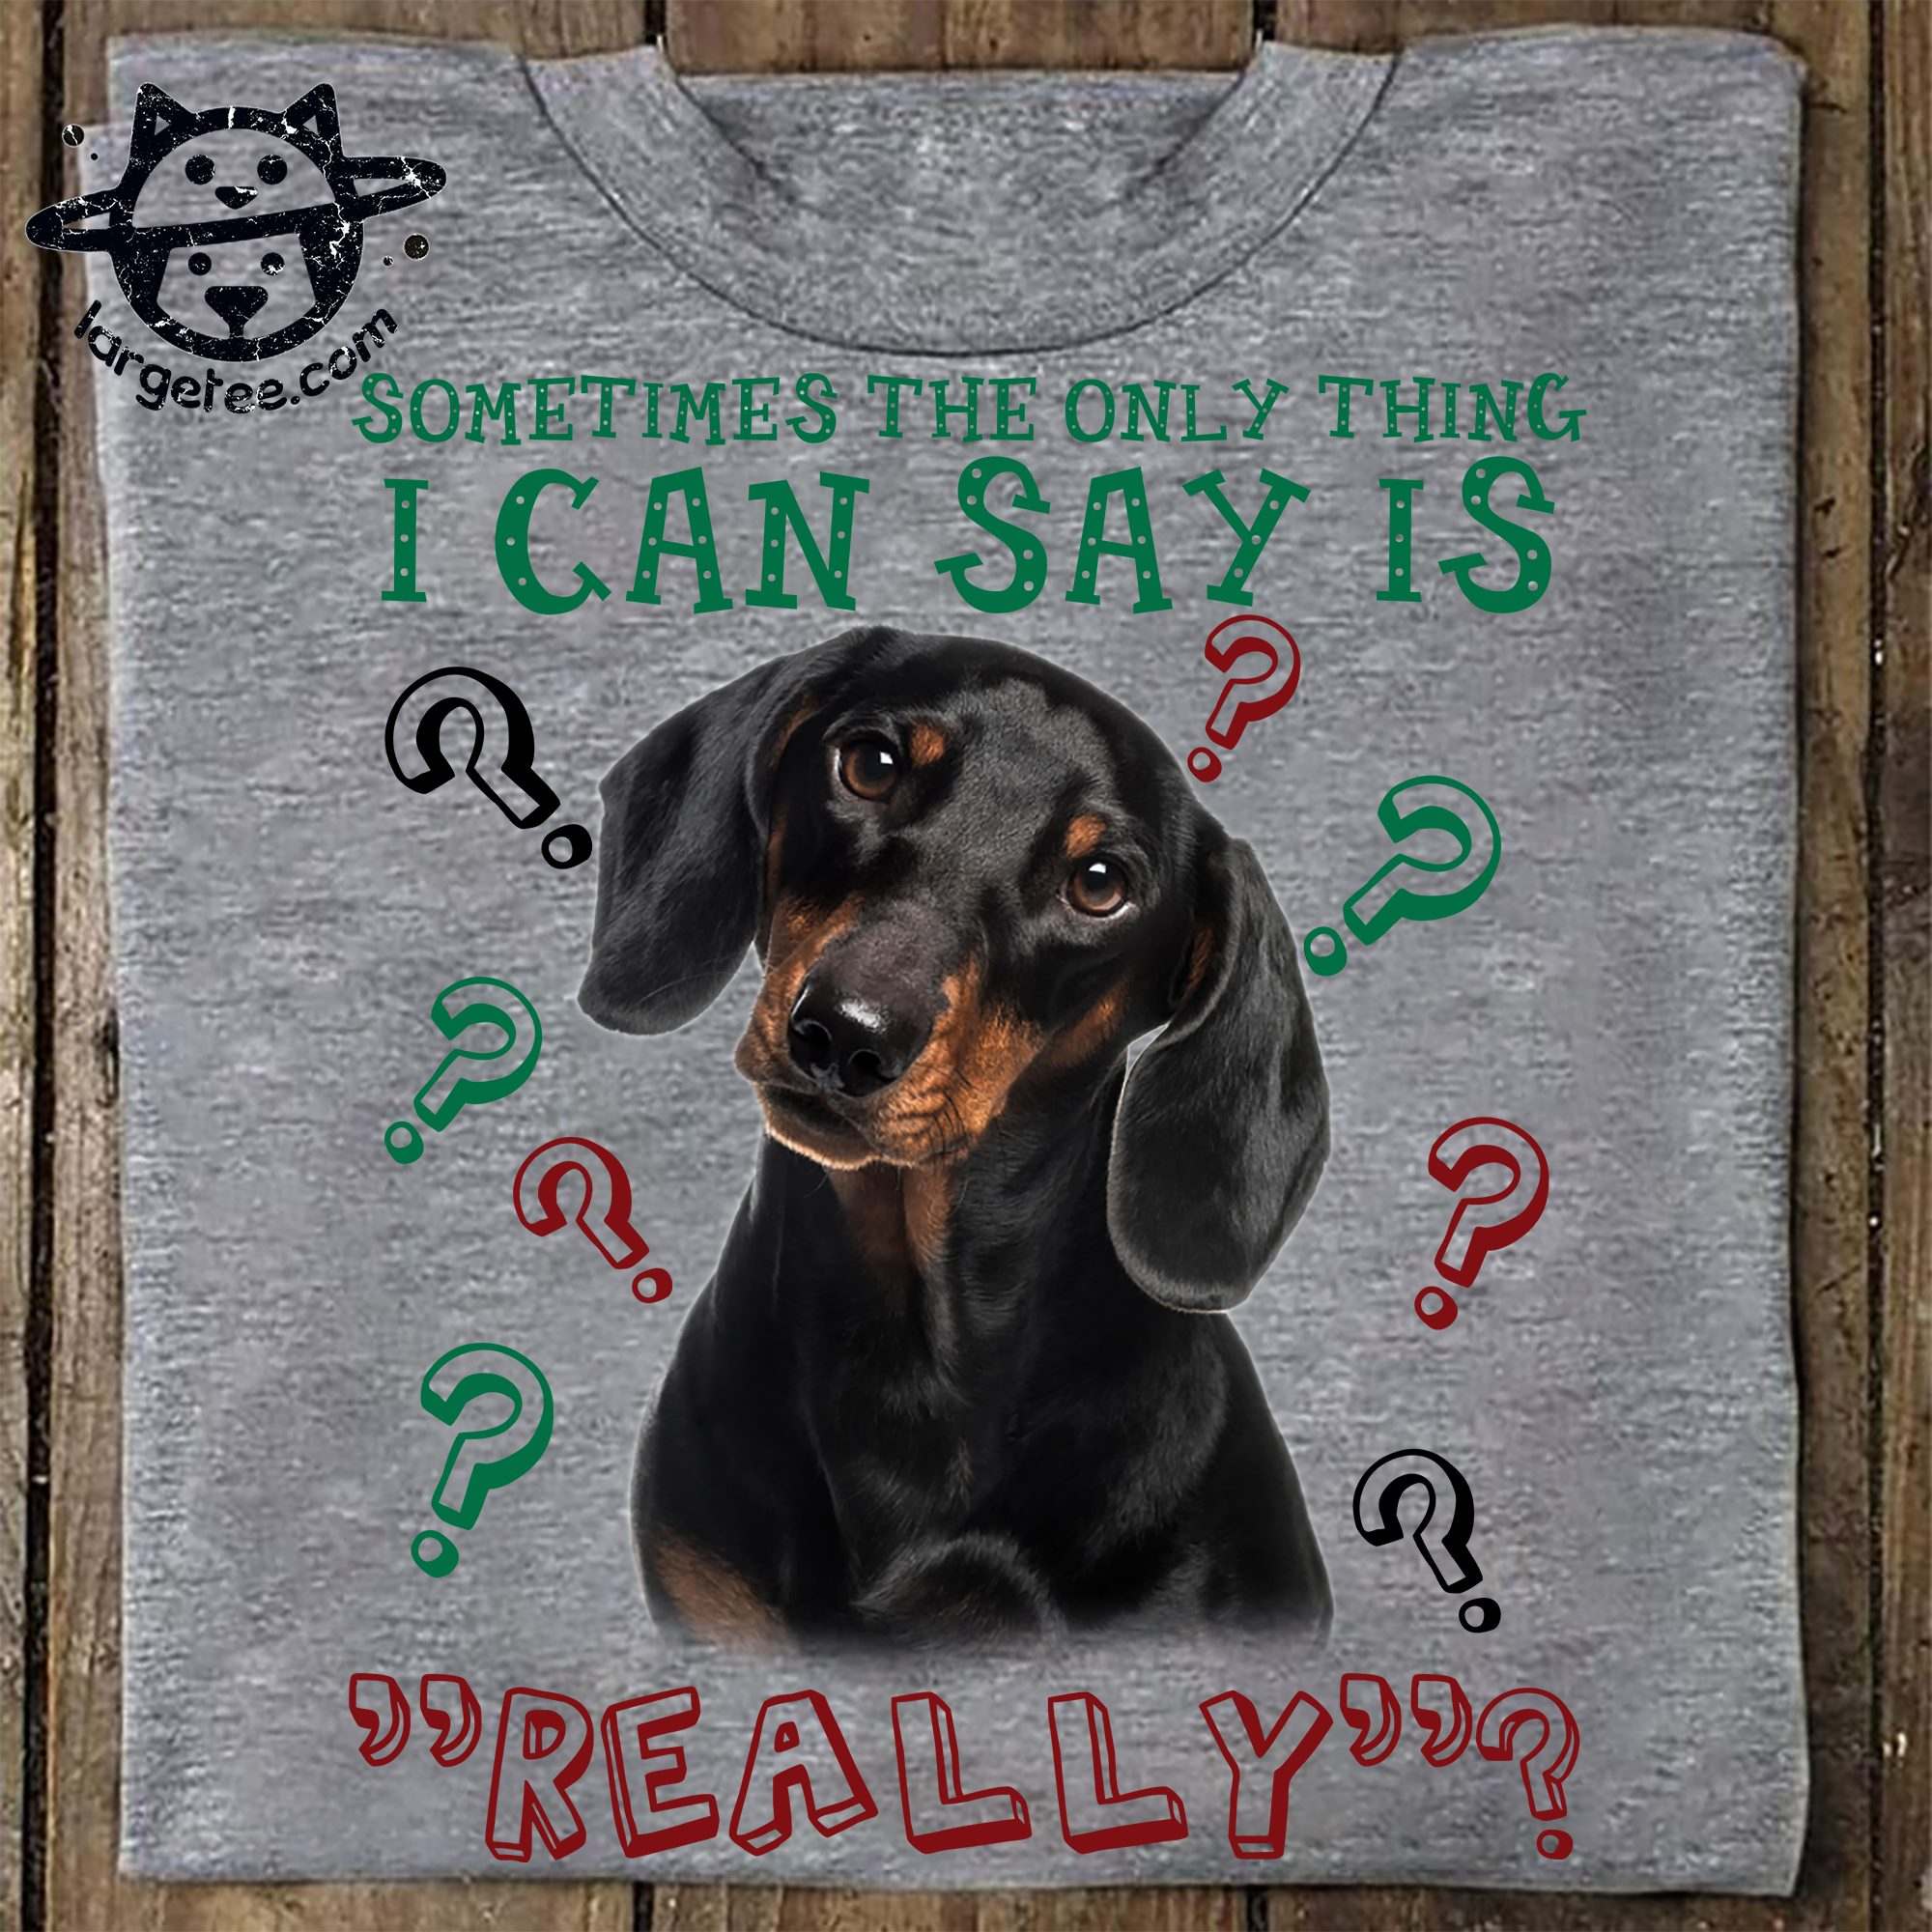 Sometimes the only thing I can say is really - Curious Dachshund